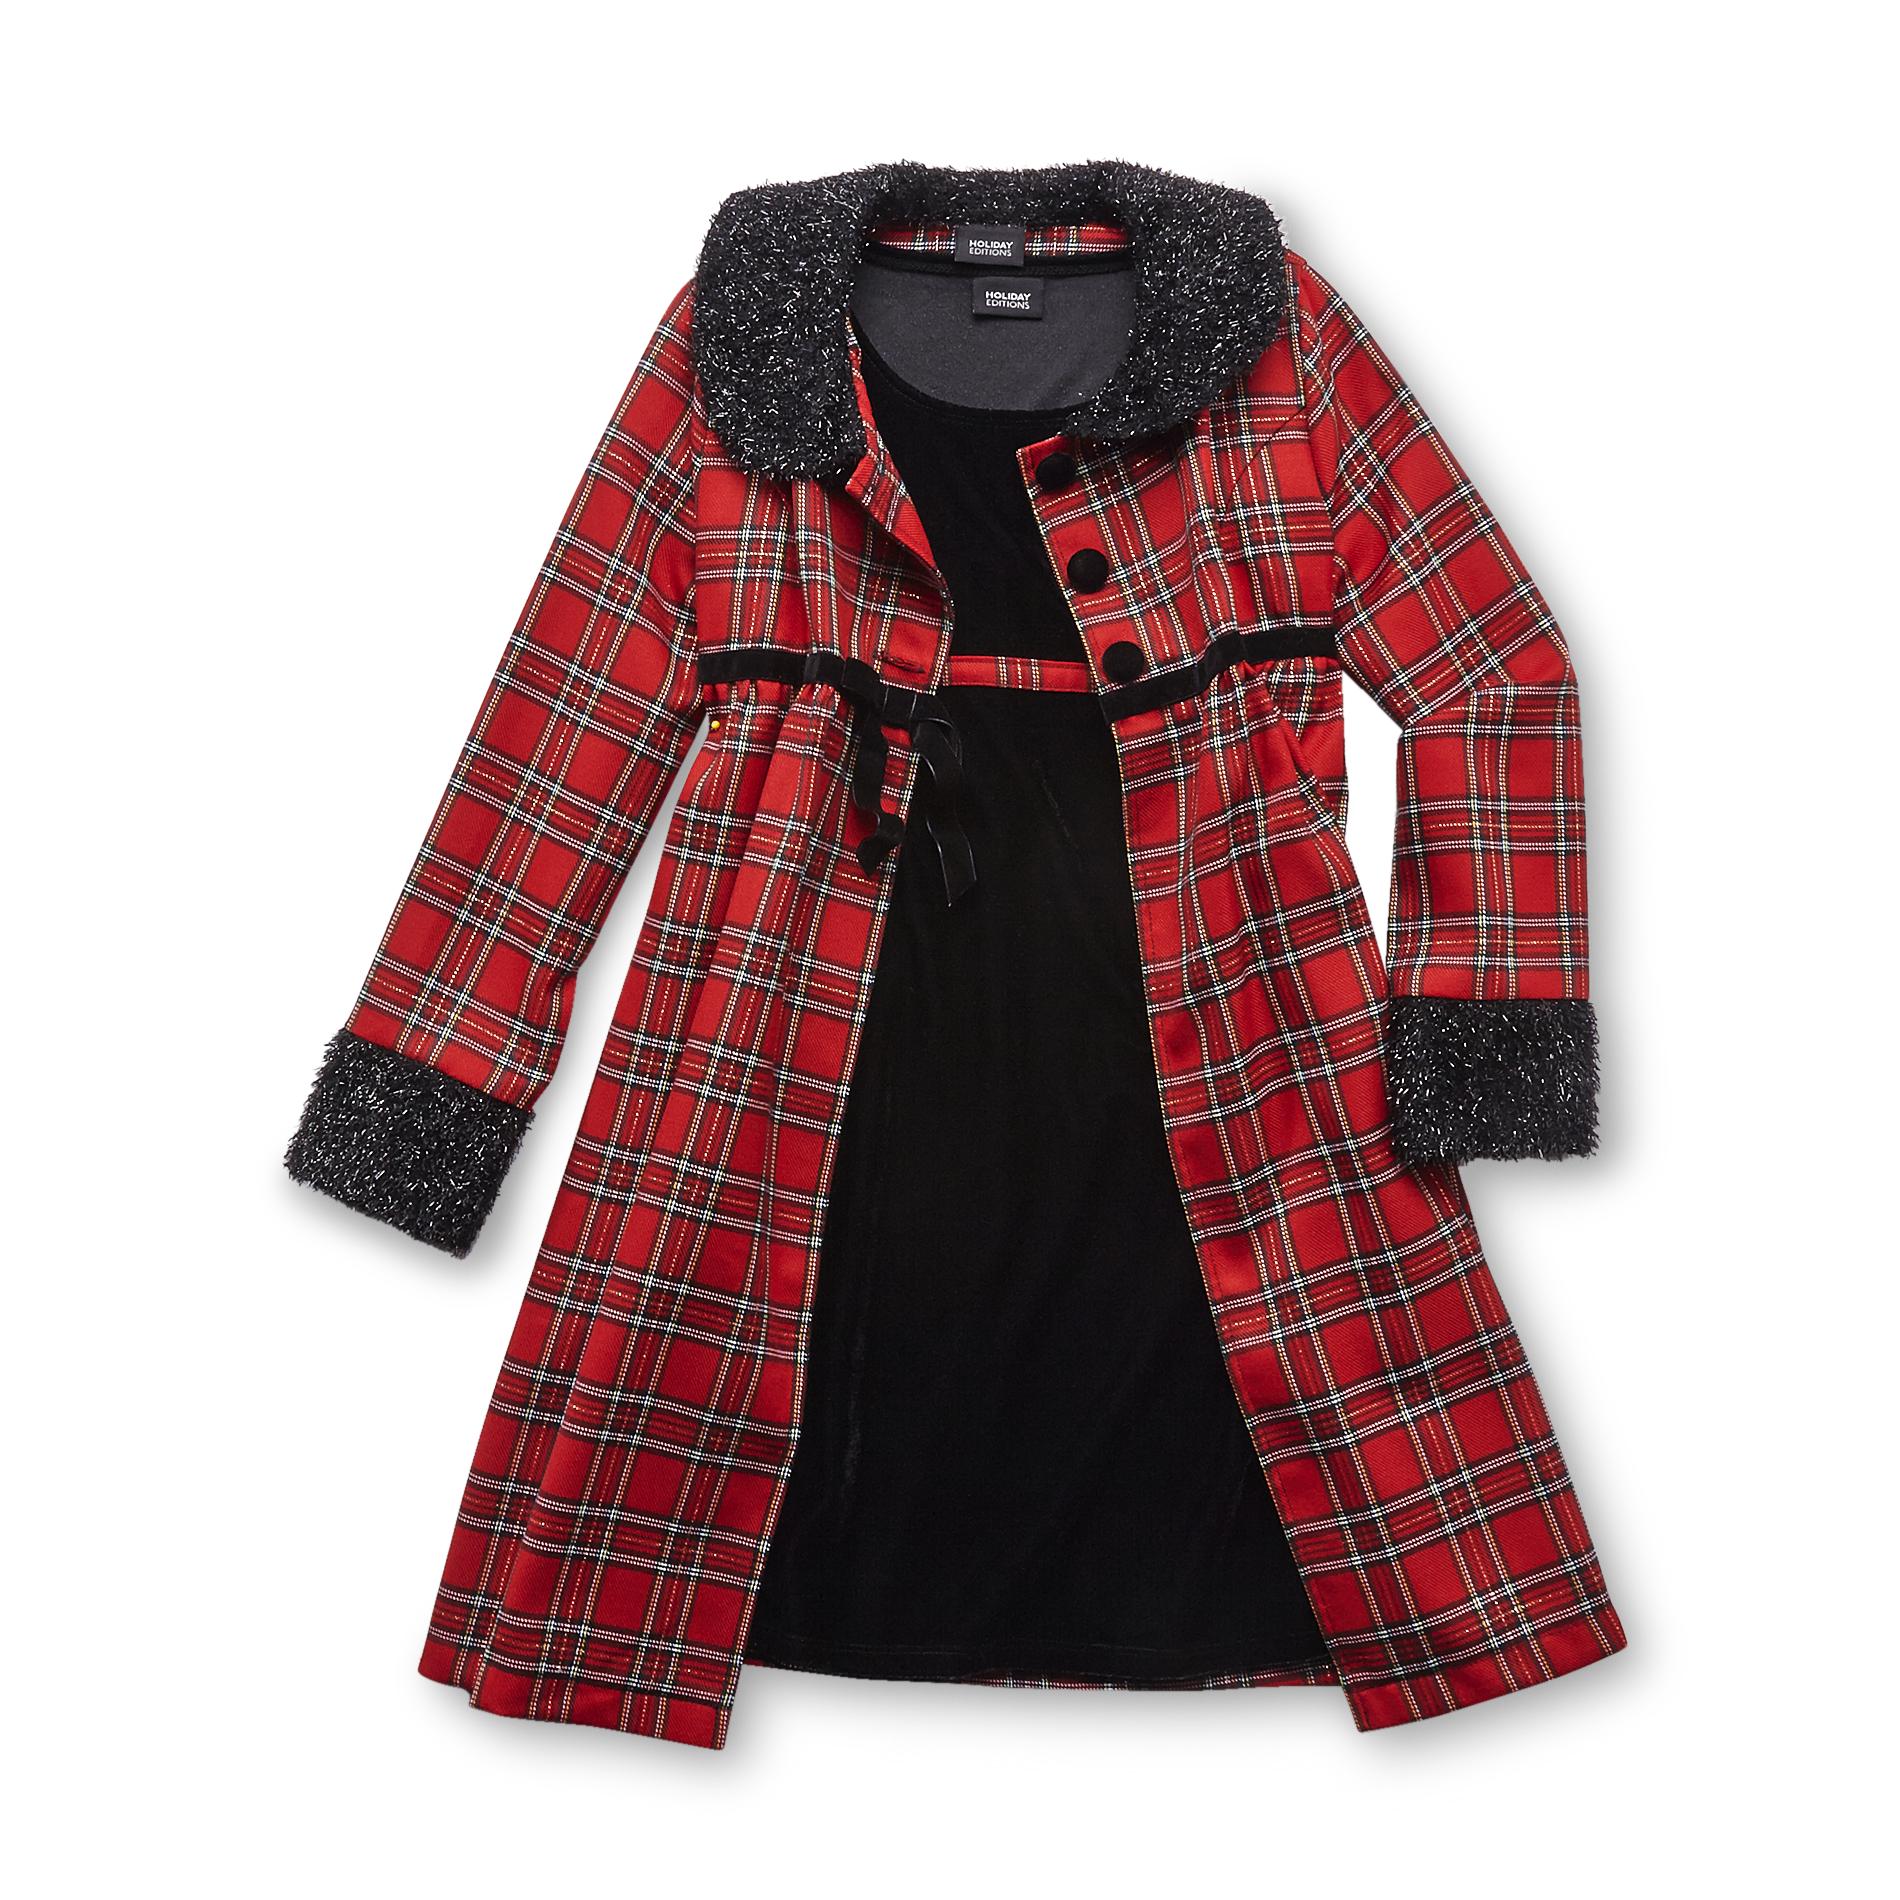 Holiday Editions Girl's Coat & Dress - Plaid